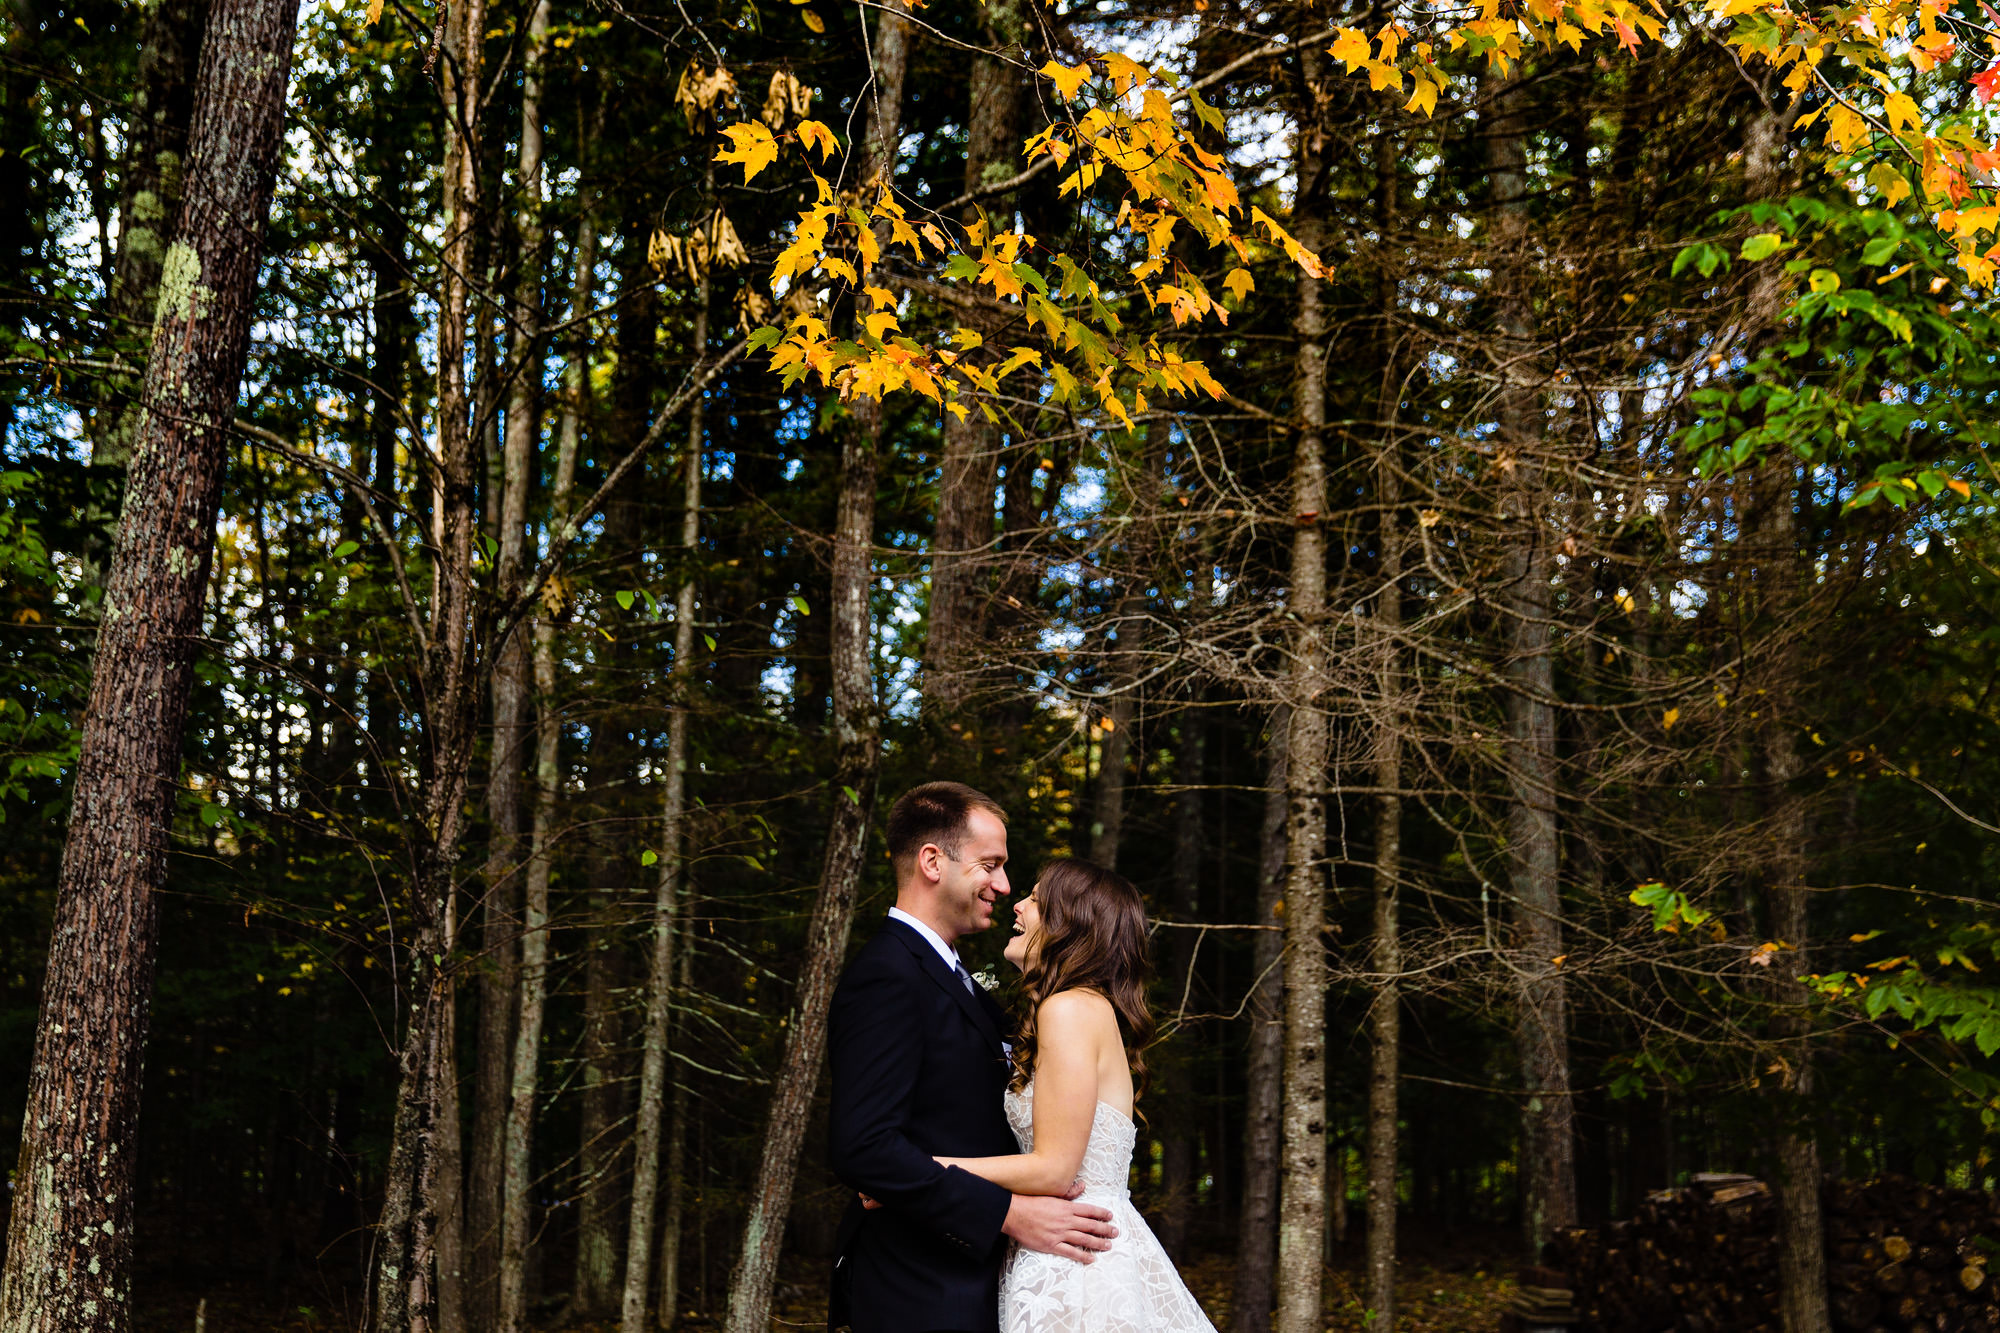 Fall wedding portraits taken in southern Maine